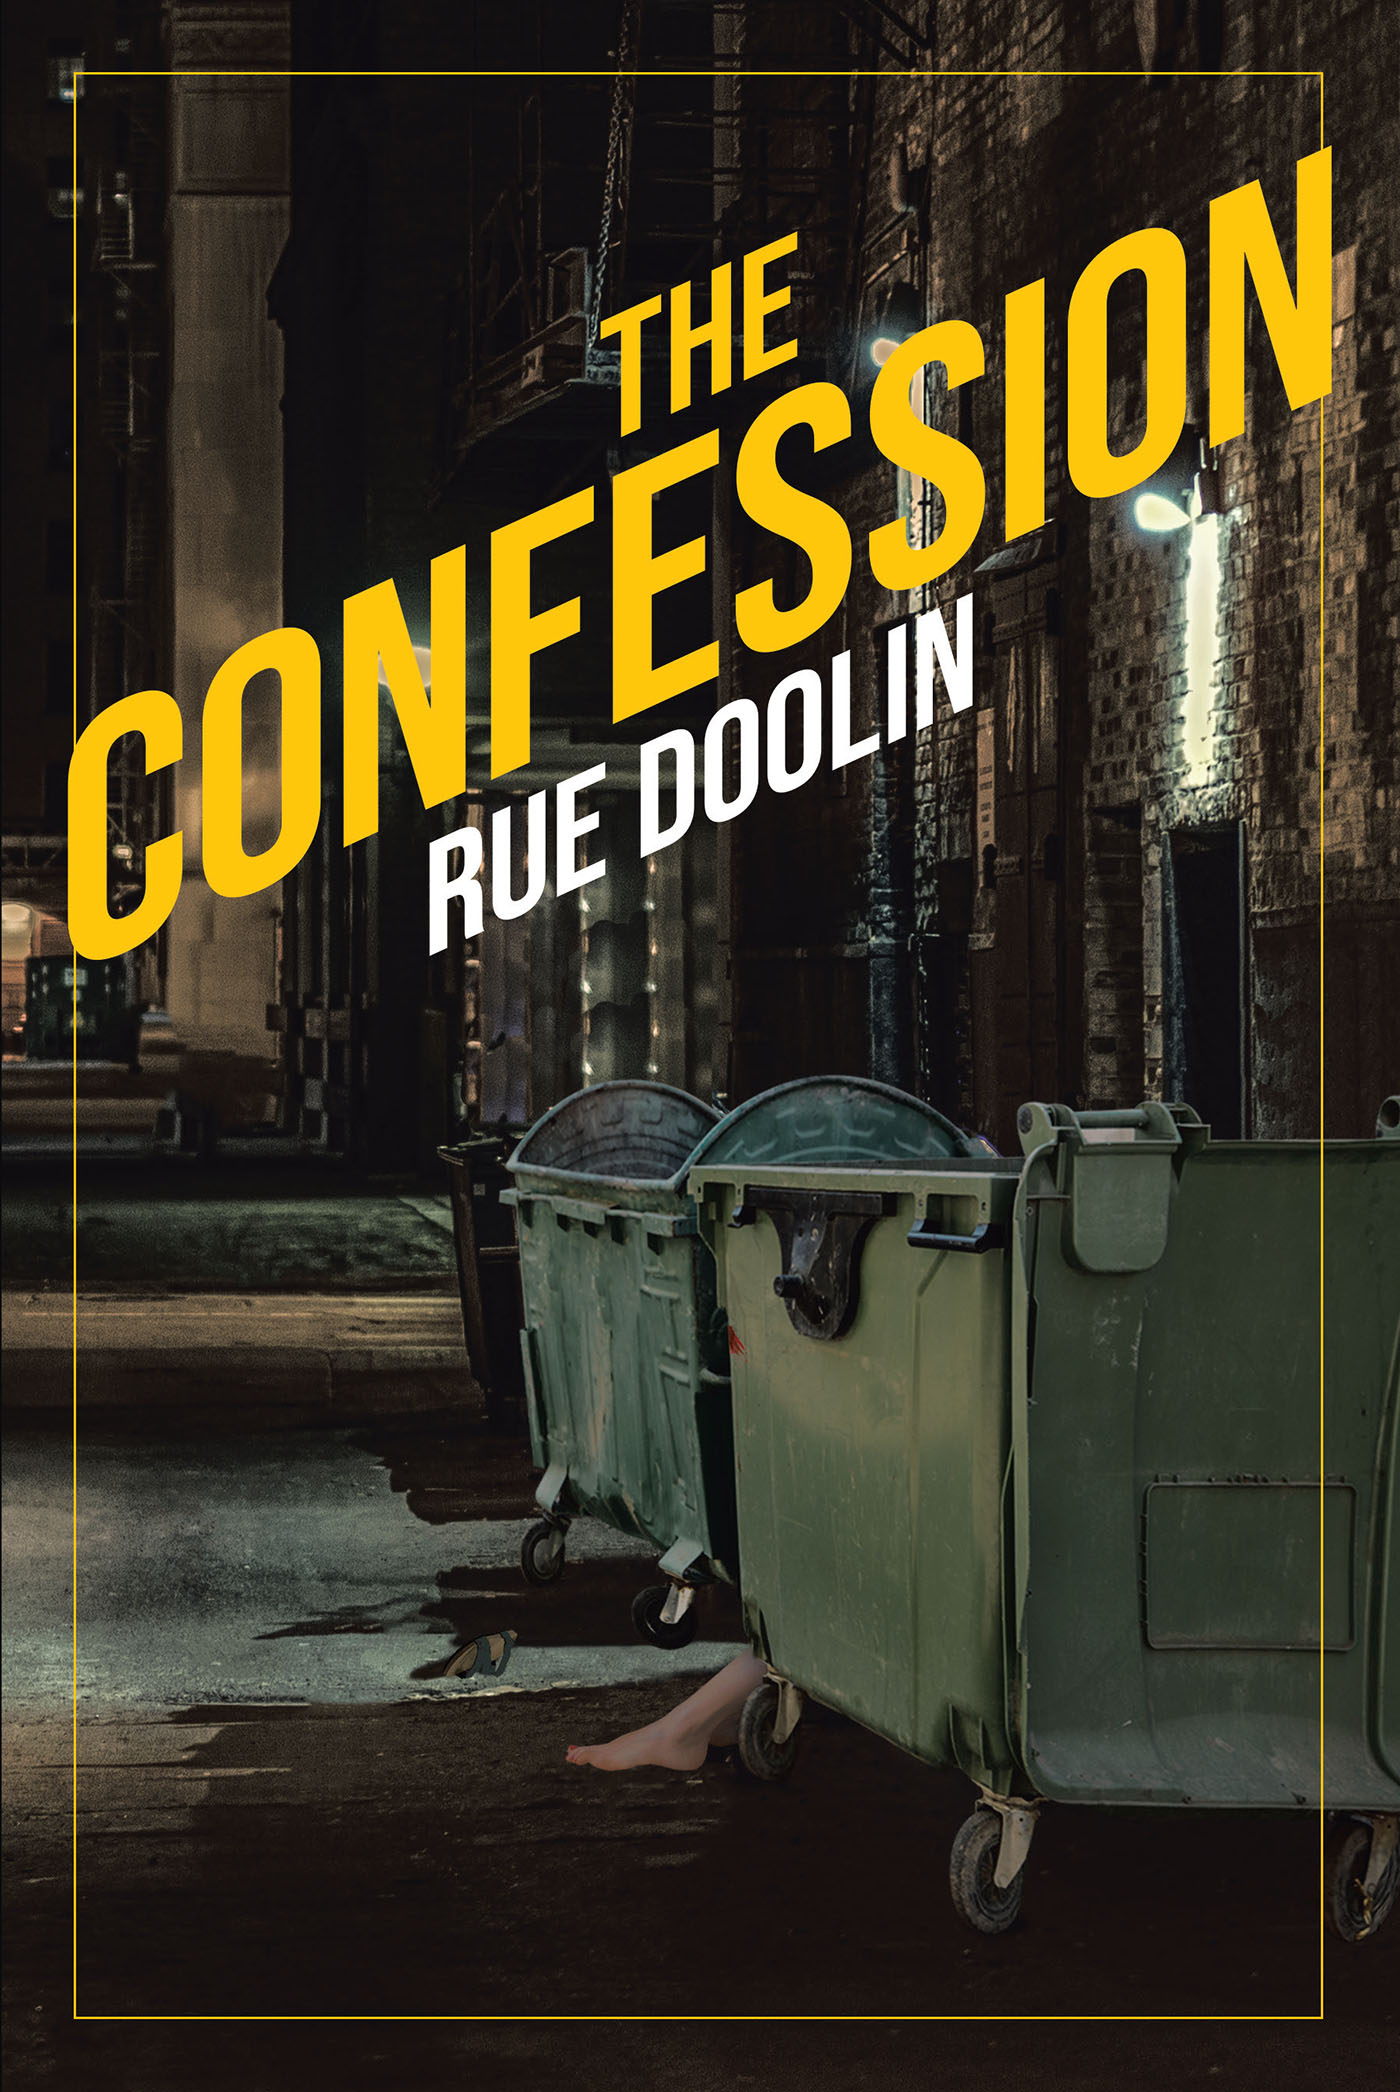 The Confession Cover Image